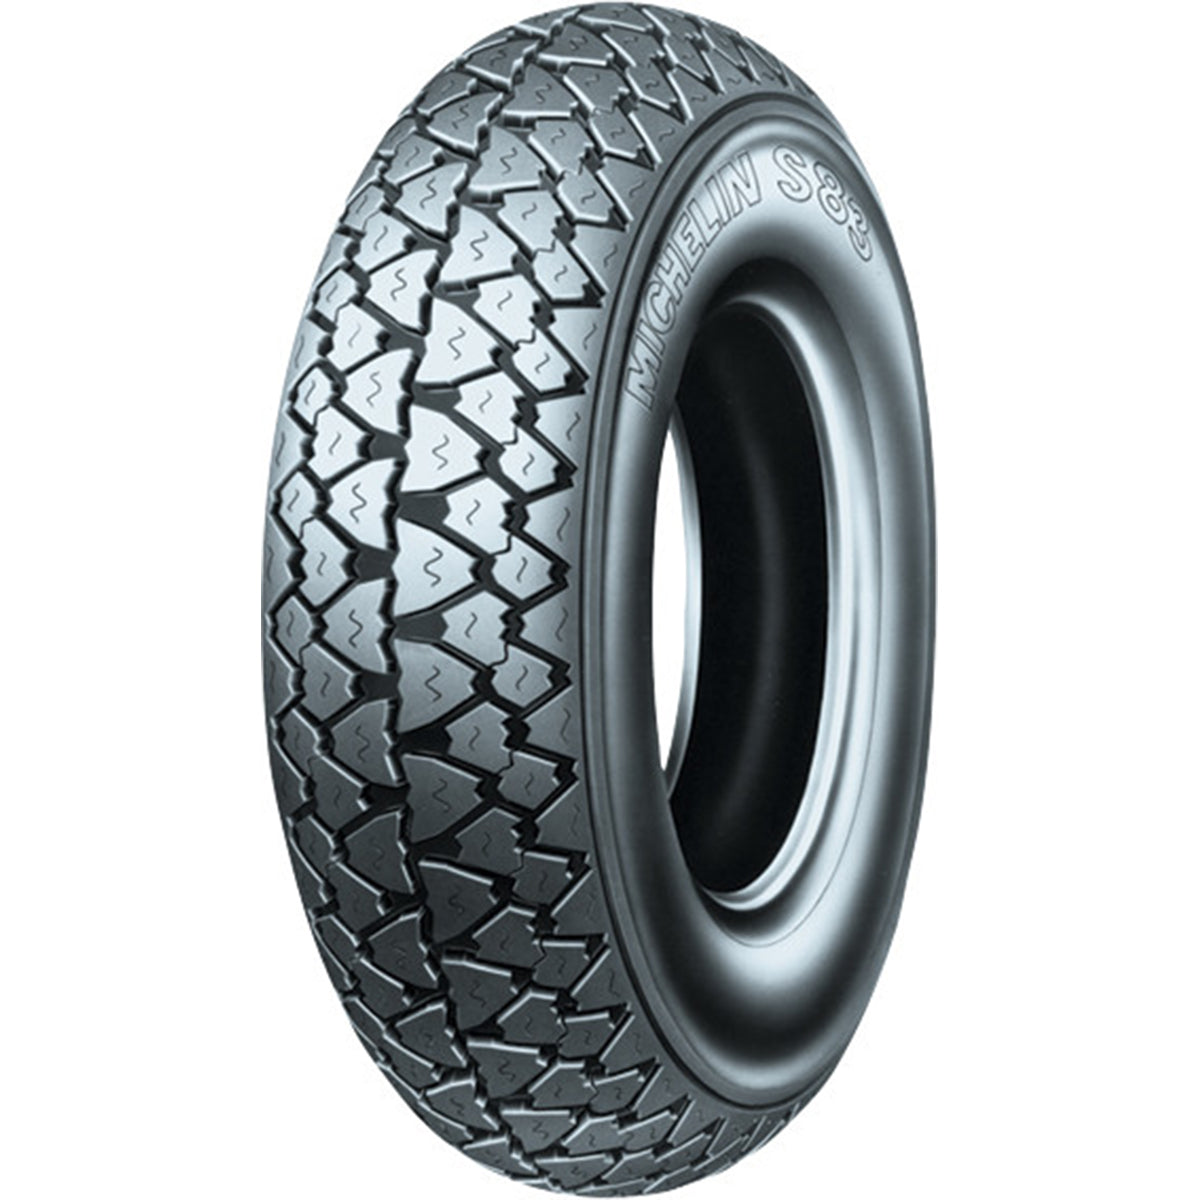 Michelin S83 Scooter 10" Front/Rear Cruiser Tires-0340